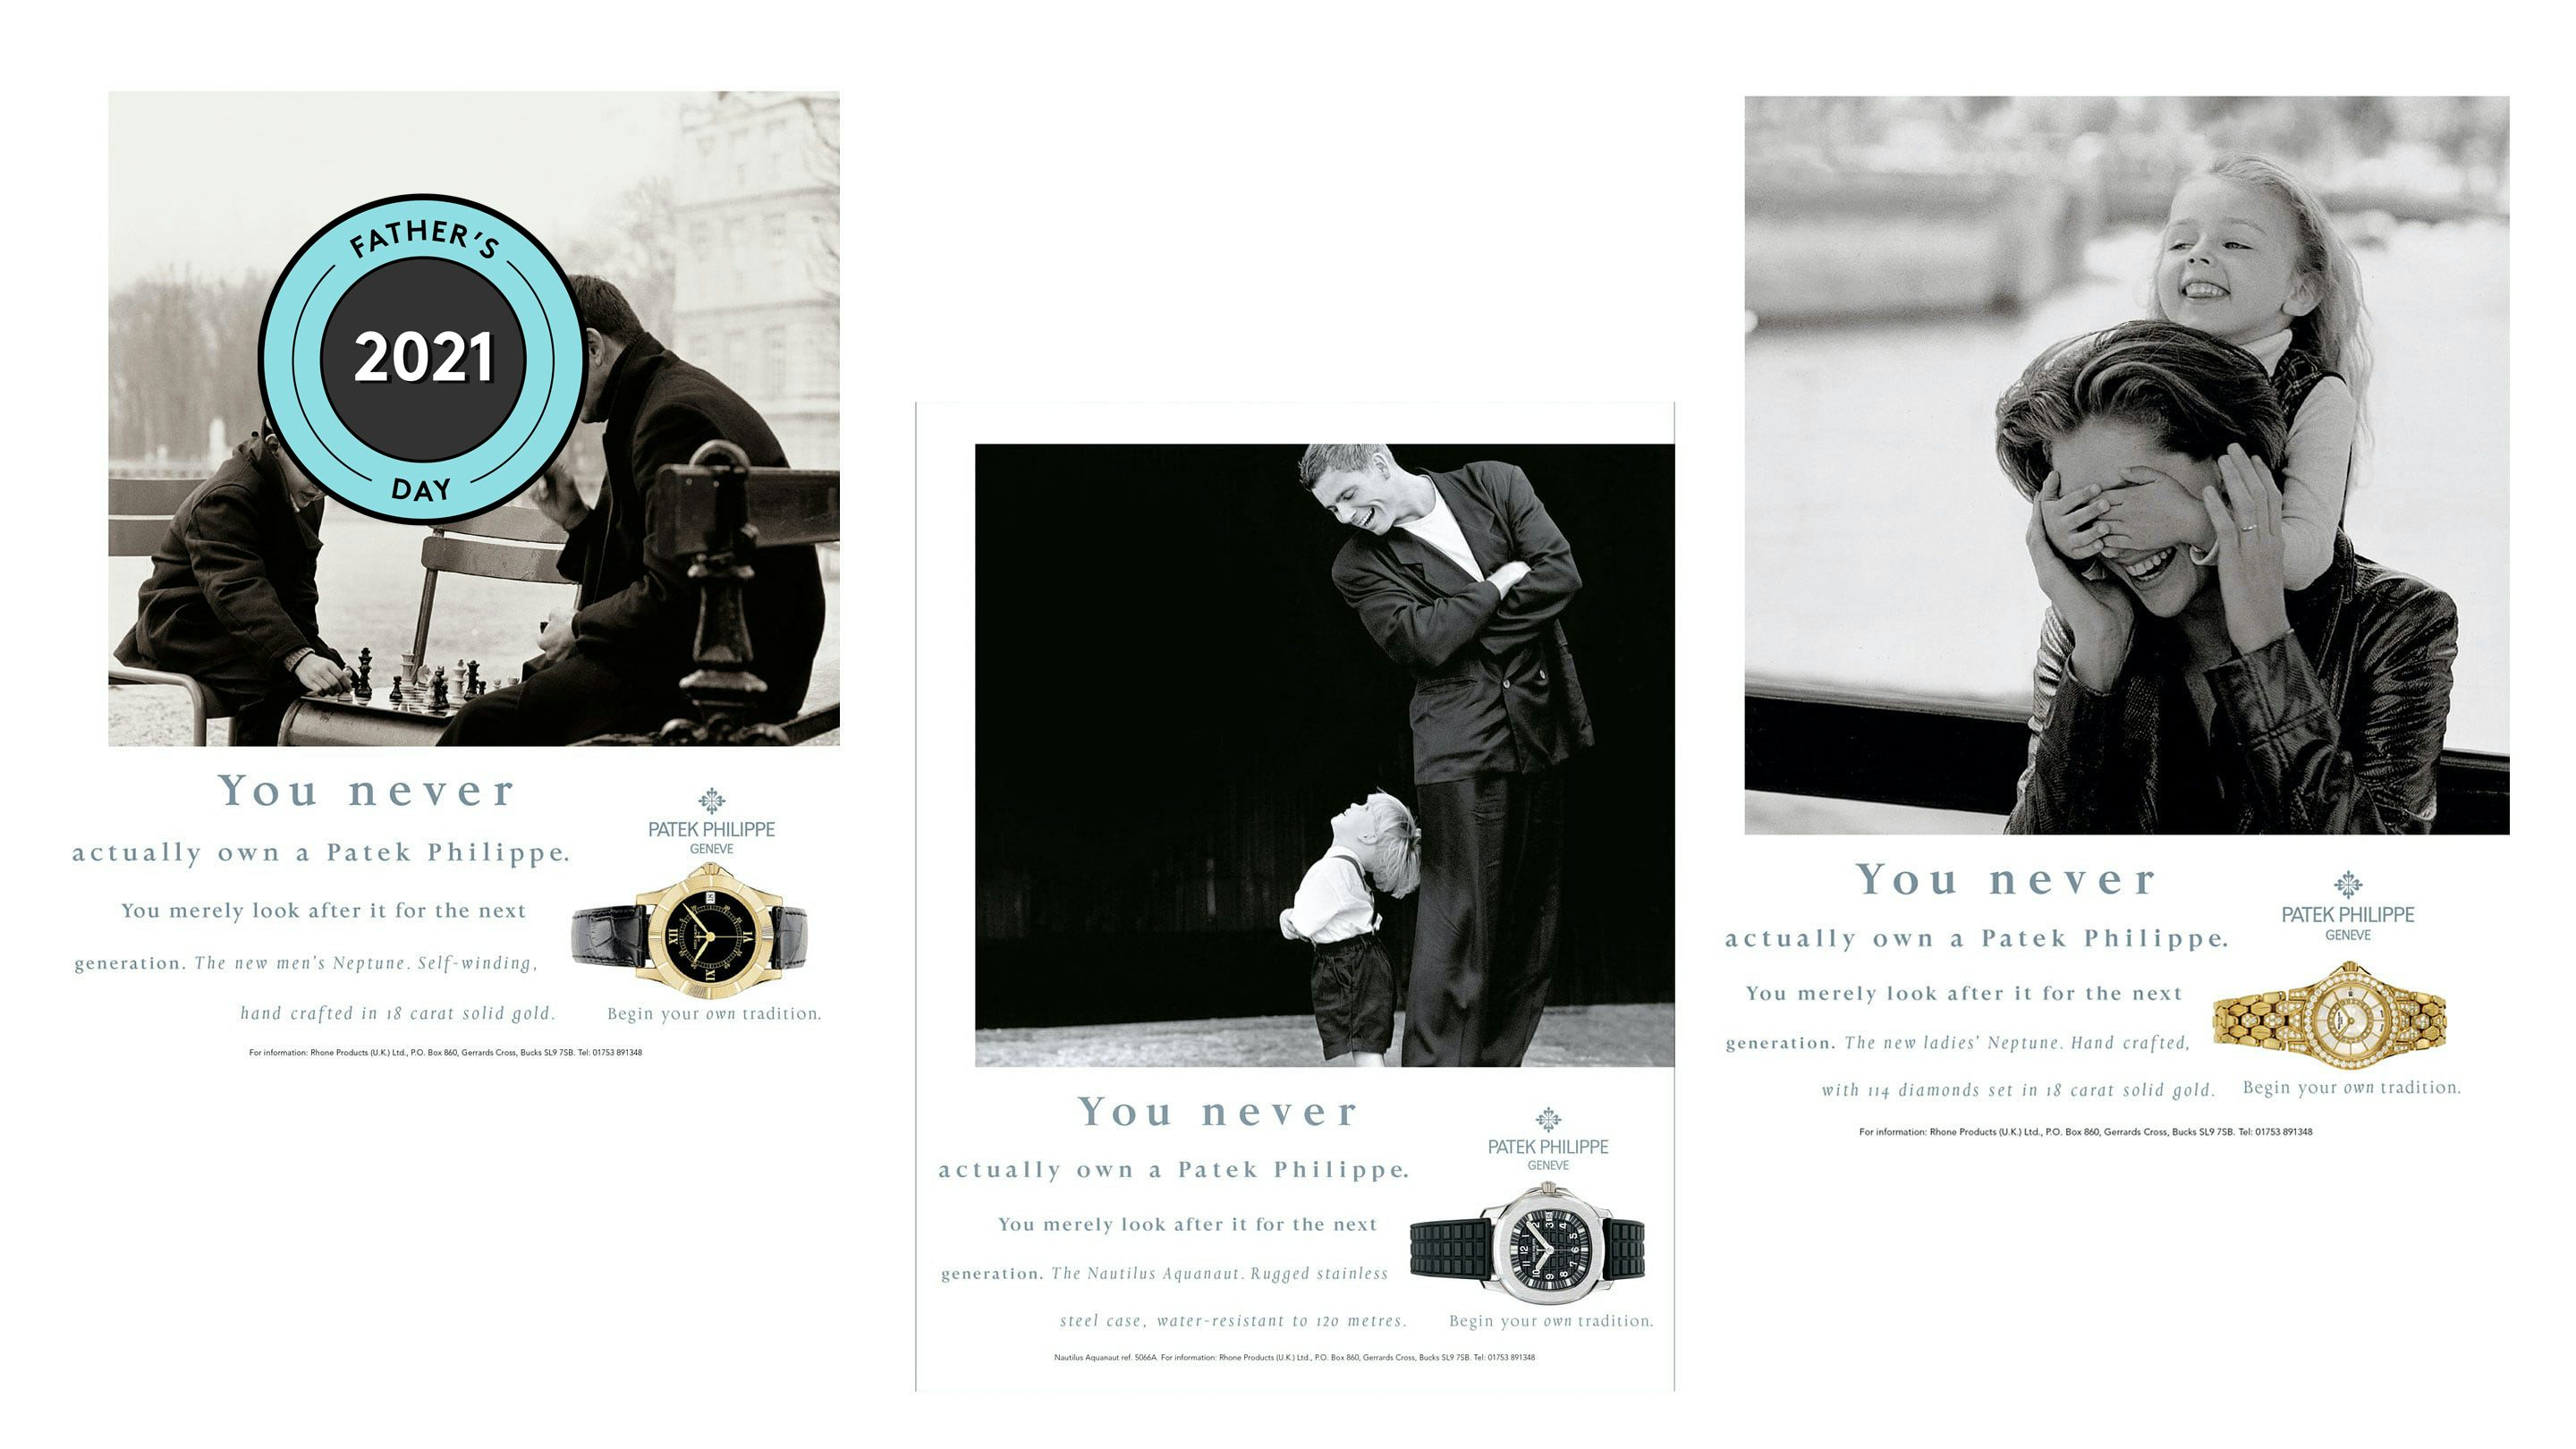 Patek Philippe: a family-owned company that has existed for generations